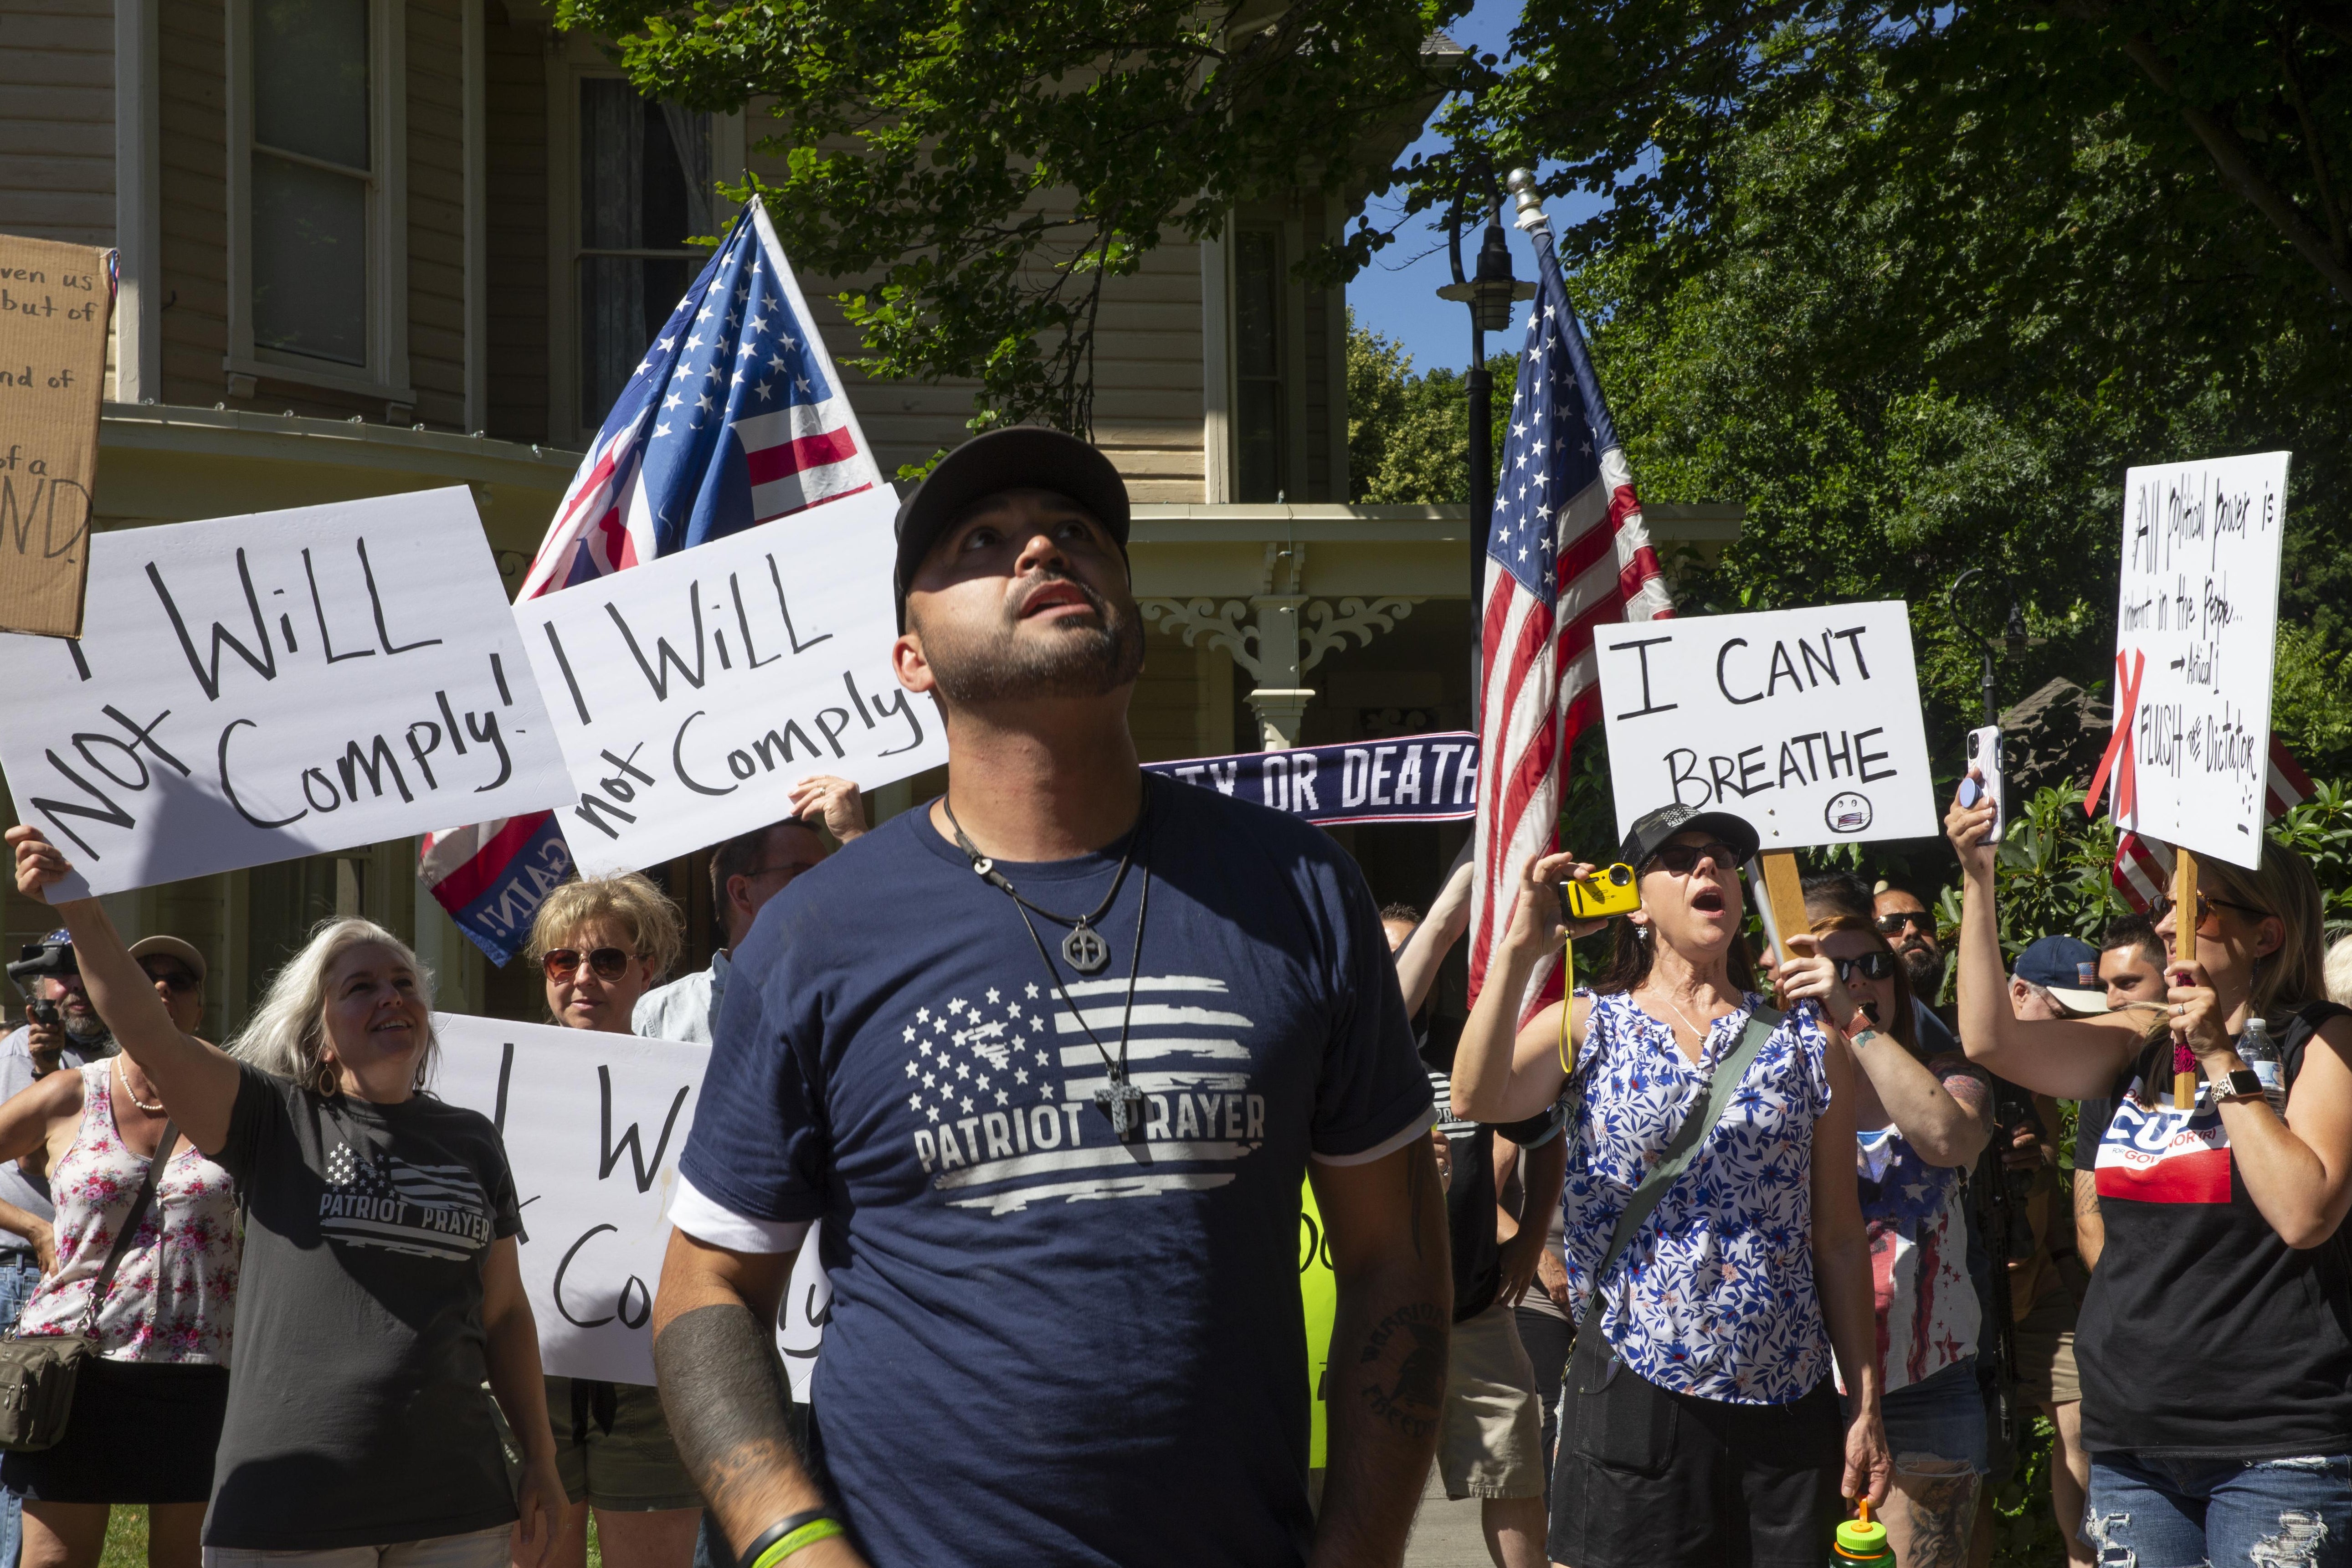 Joey Gibson standing in front of a crowd of people holding signs that say "I CAN'T BREATHE" and "I WILL NOT COMPLY"